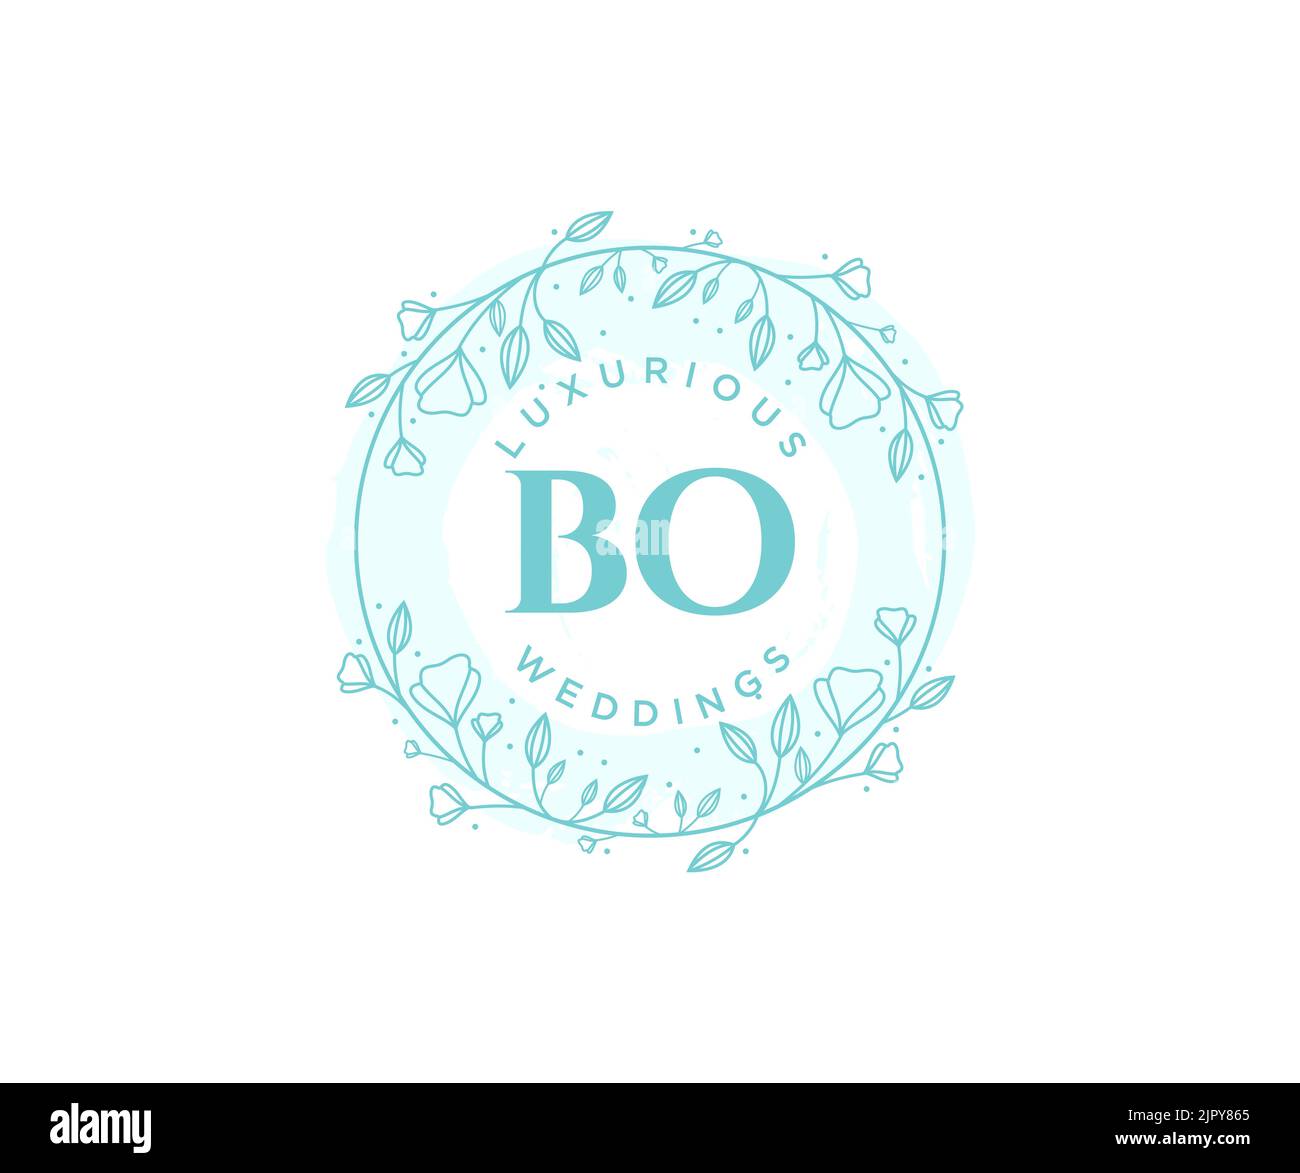 BO Initials letter Wedding monogram logos template, hand drawn modern minimalistic and floral templates for Invitation cards, Save the Date, elegant Stock Vector